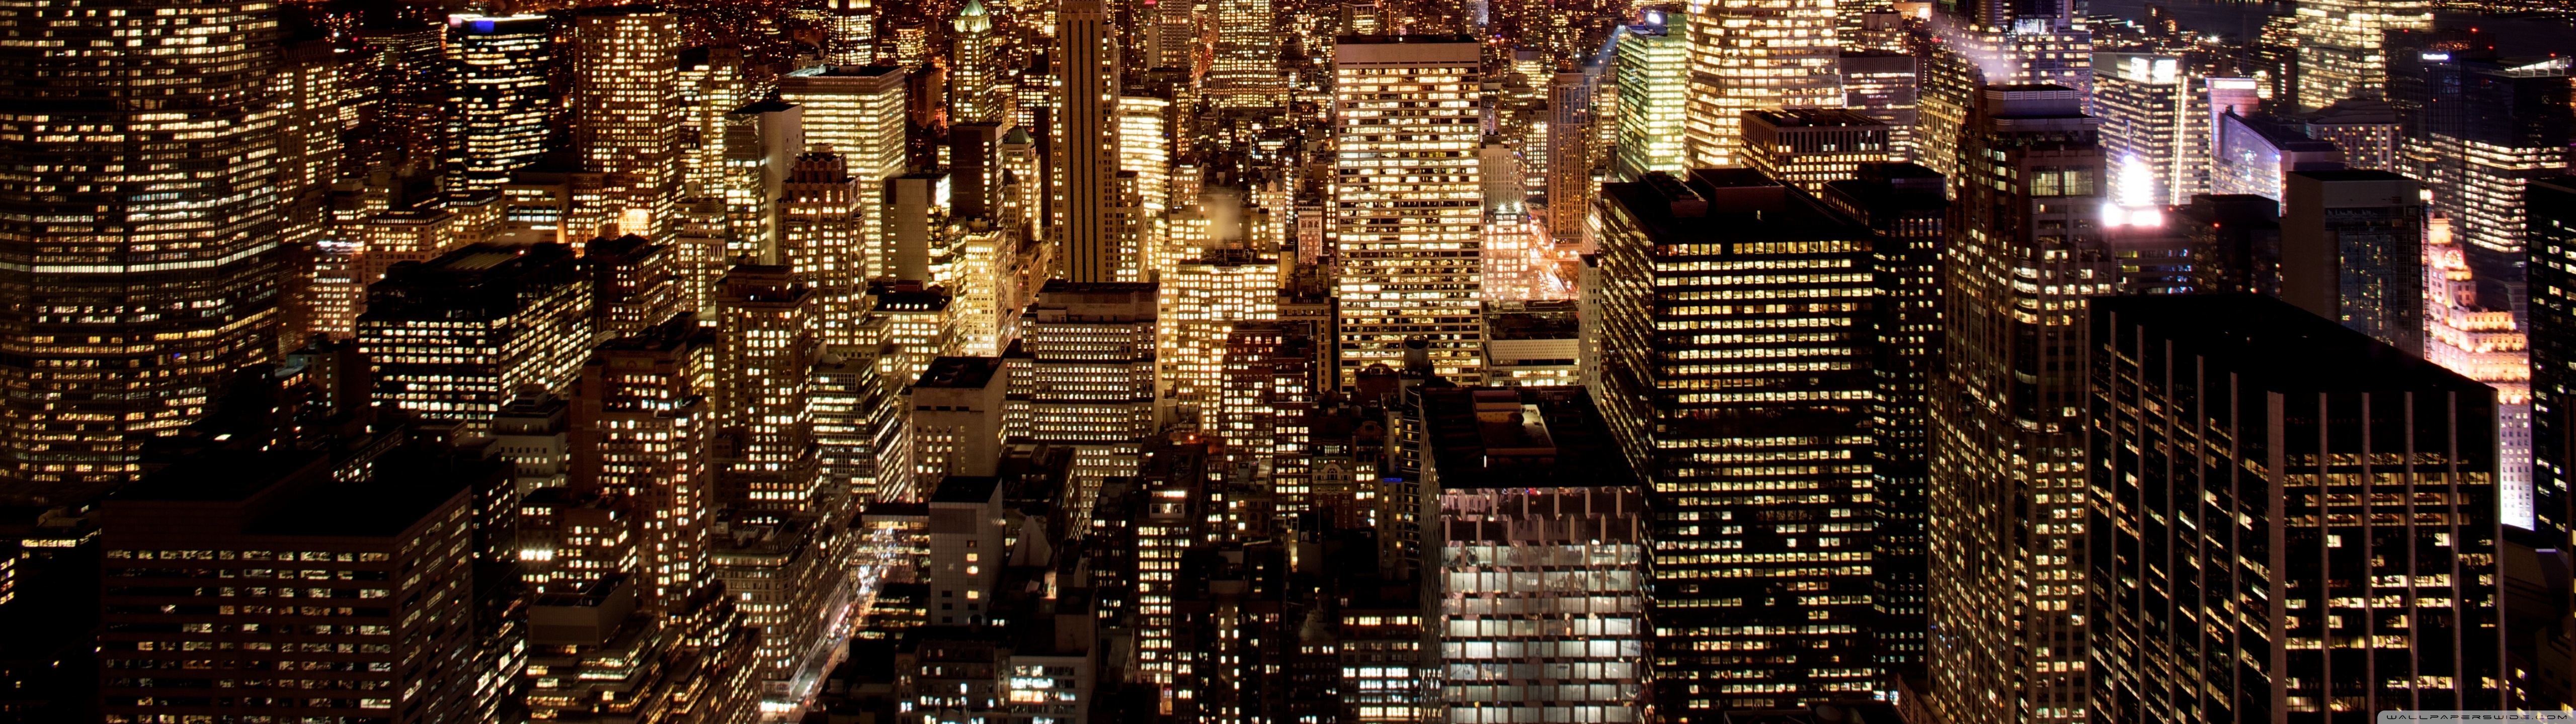 New York City At Night Ultra HD Desktop Background Wallpaper for : Multi  Display, Dual Monitor : Tablet : Smartphone